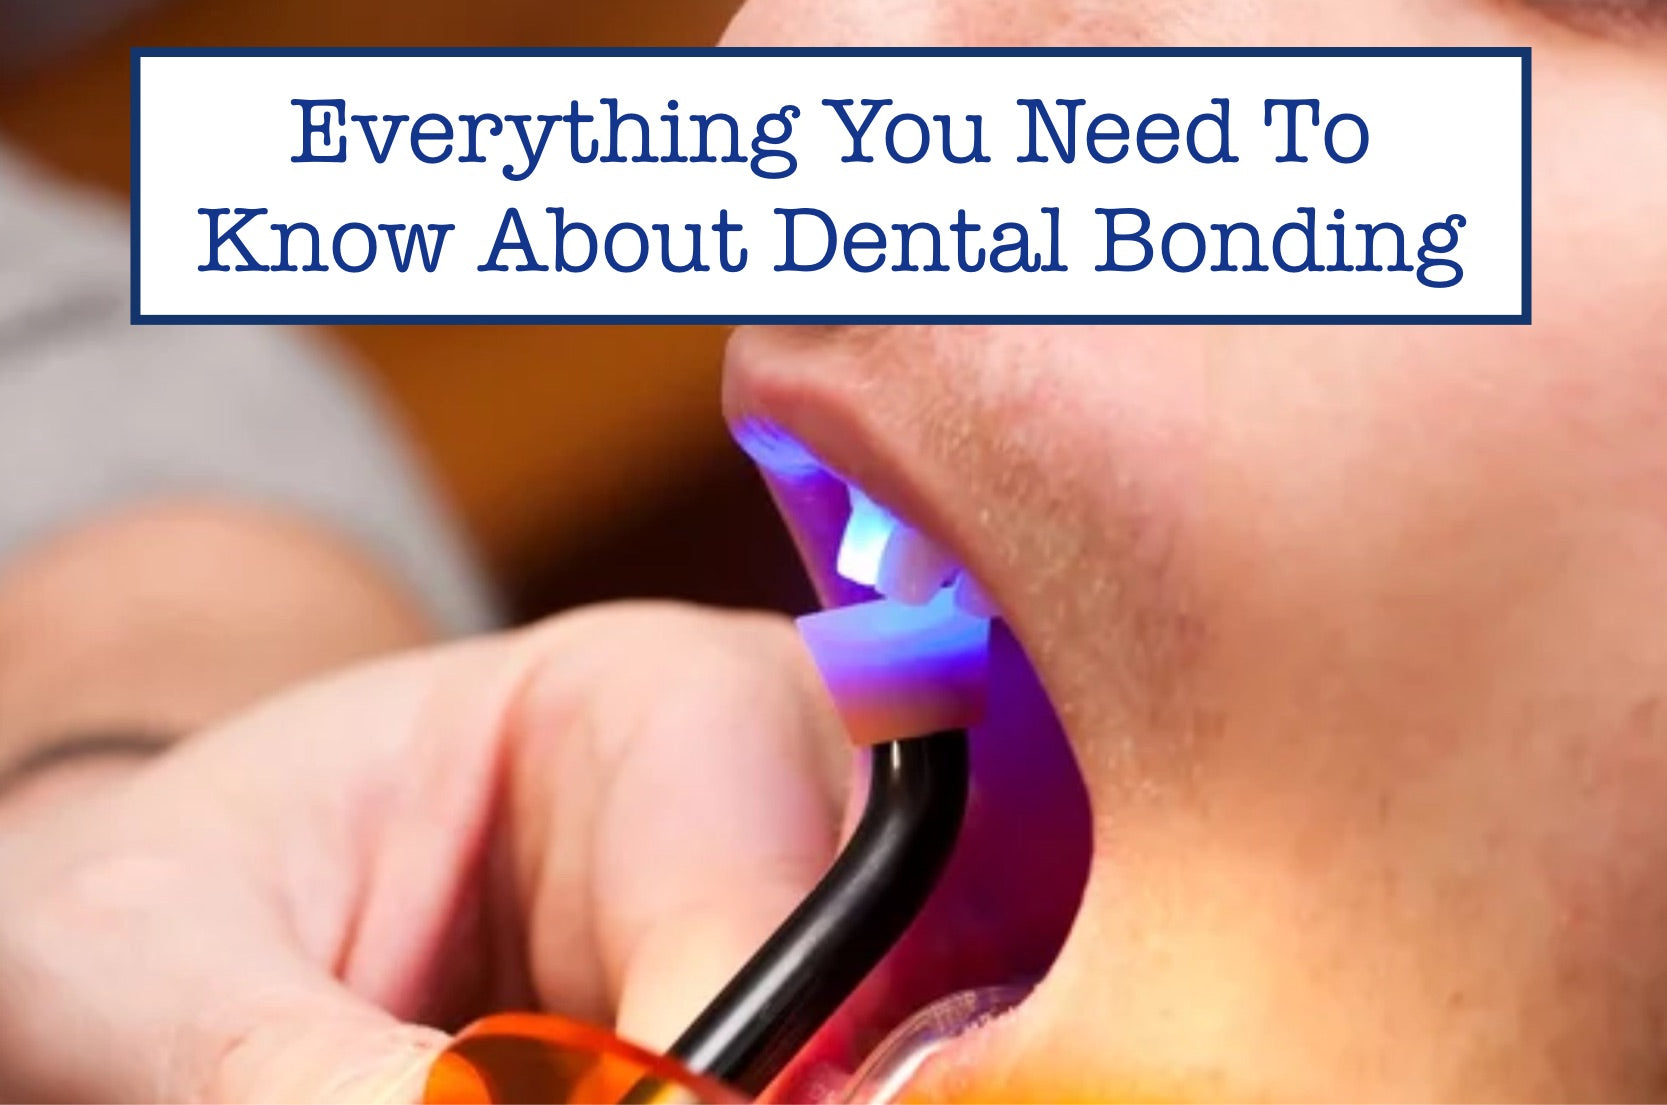 Everything You Need To Know About Dental Bonding